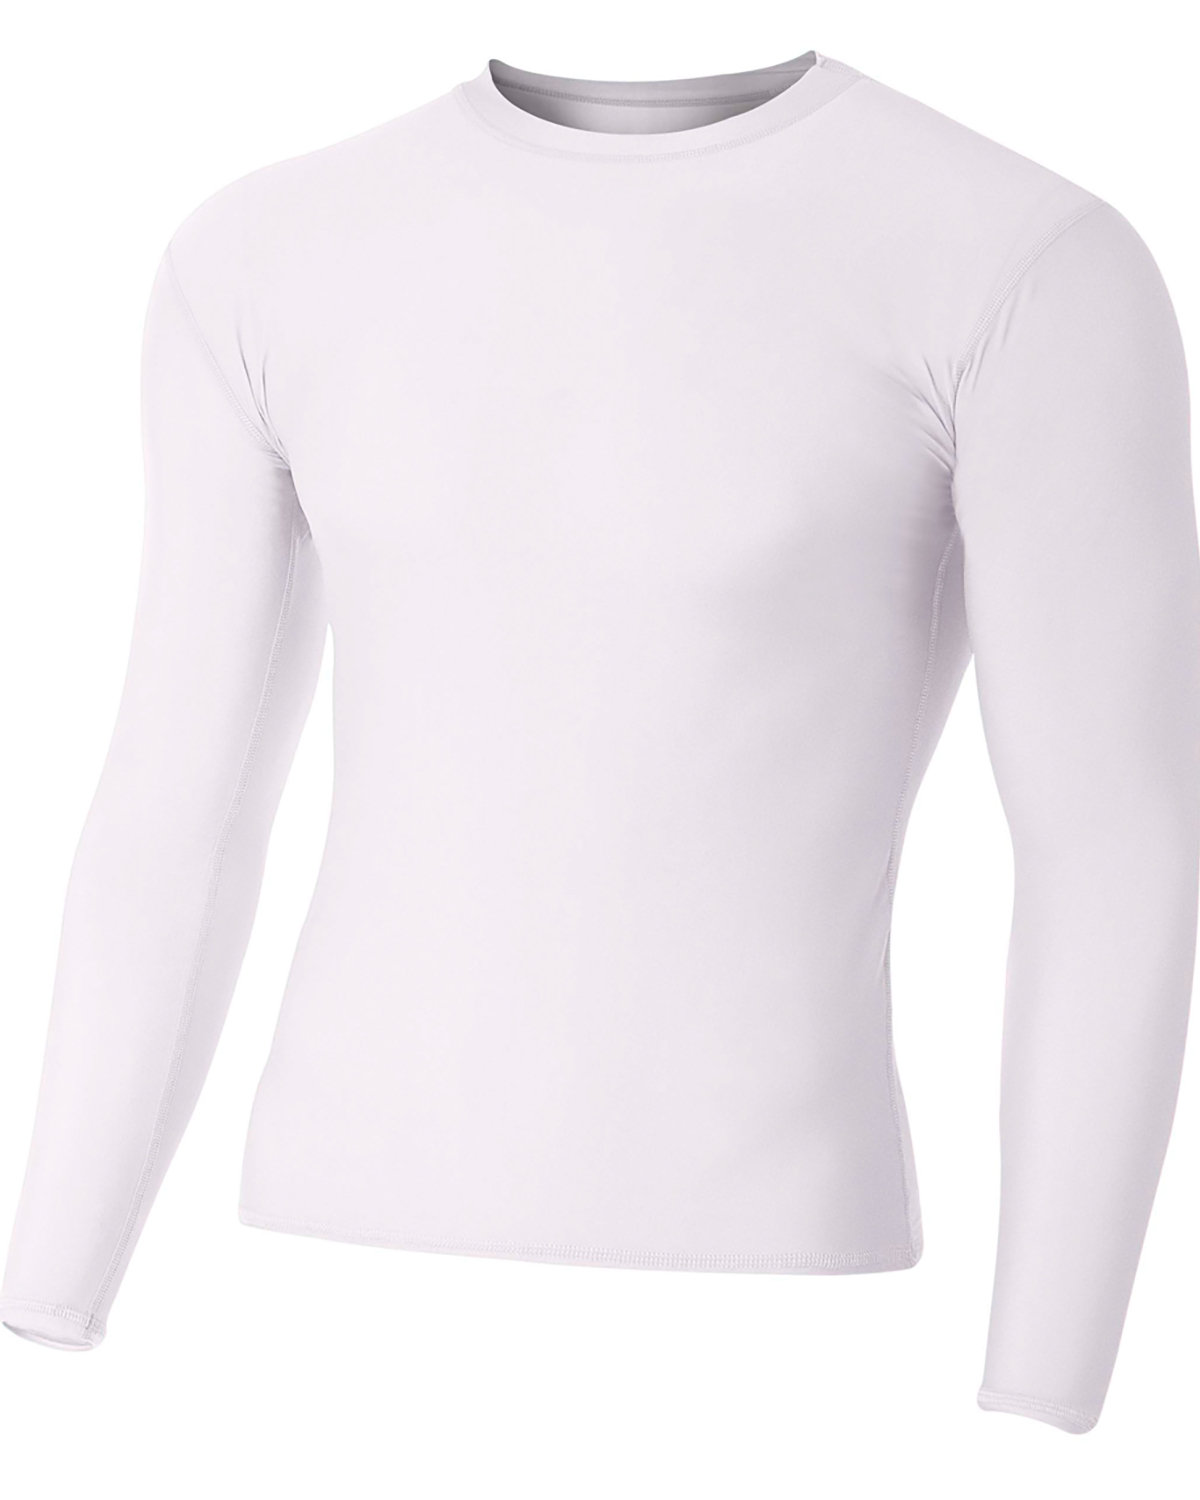 A4 Adult Polyester Spandex Long Sleeve Compression T-Shirt | alphabroder